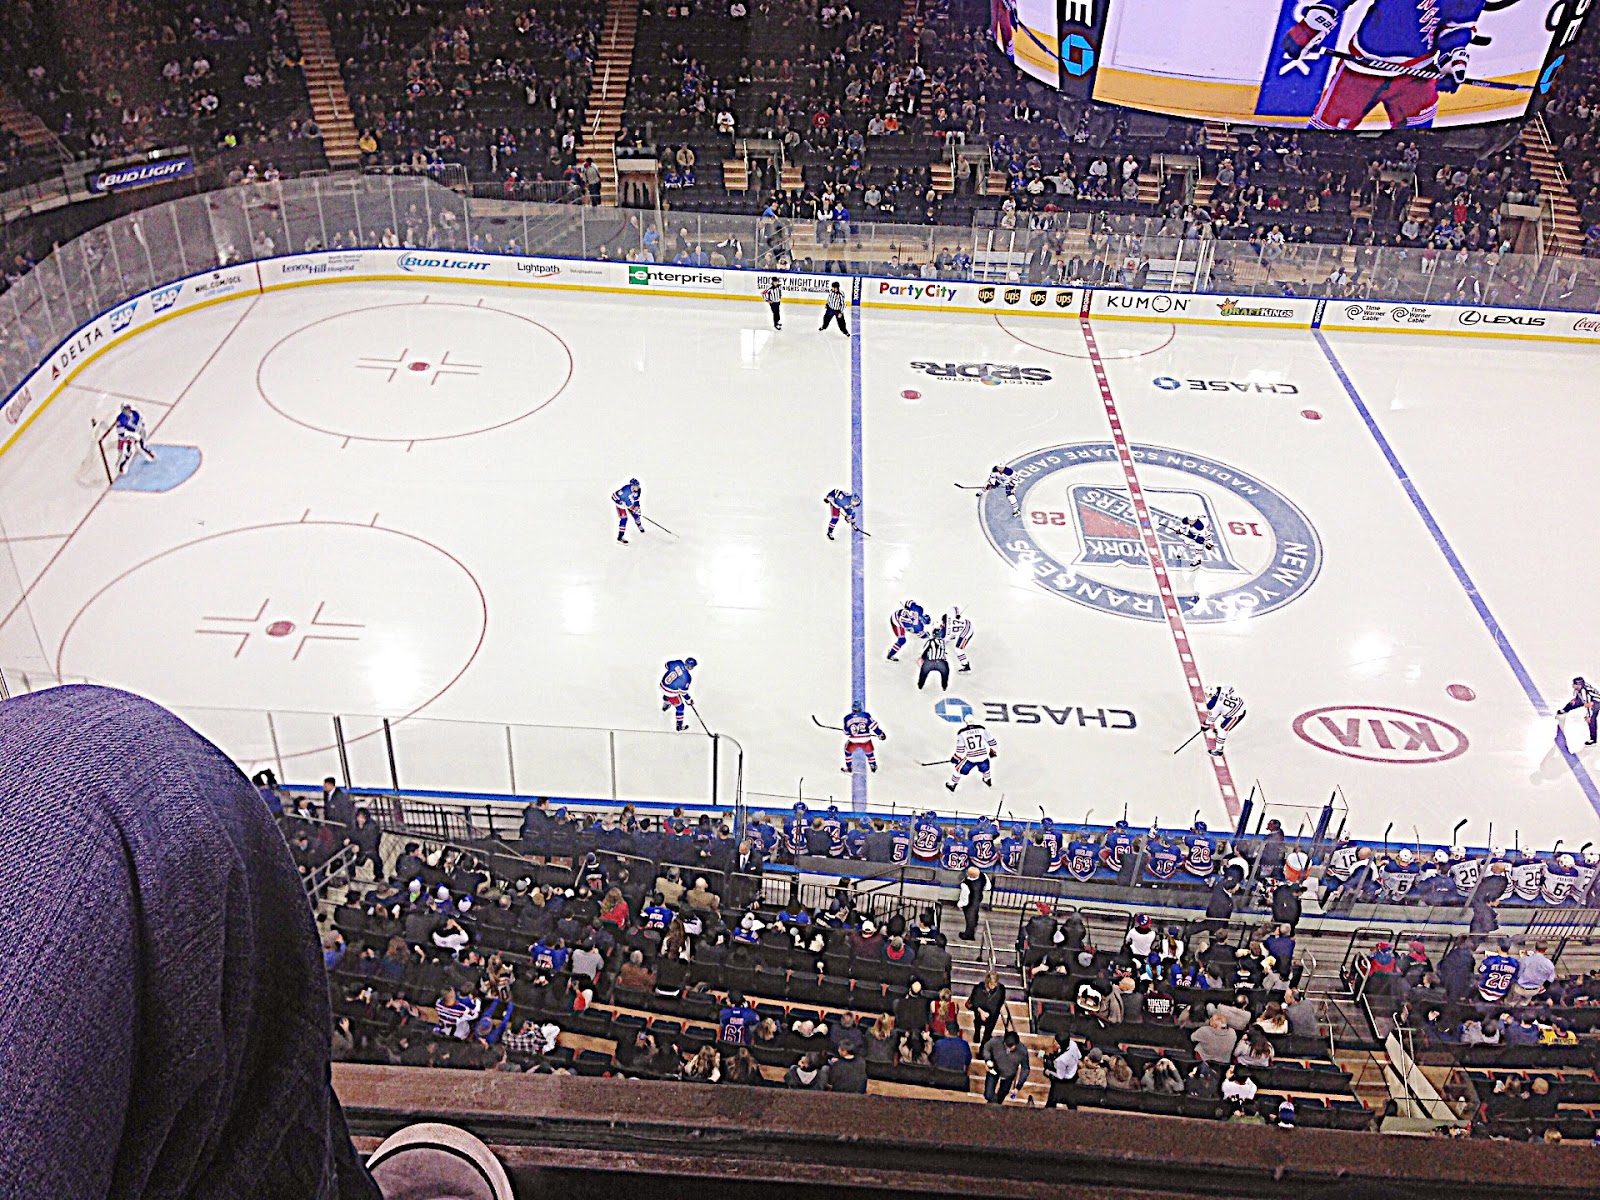 The McClarnon Situation New York Rangers game Madison Square Garden